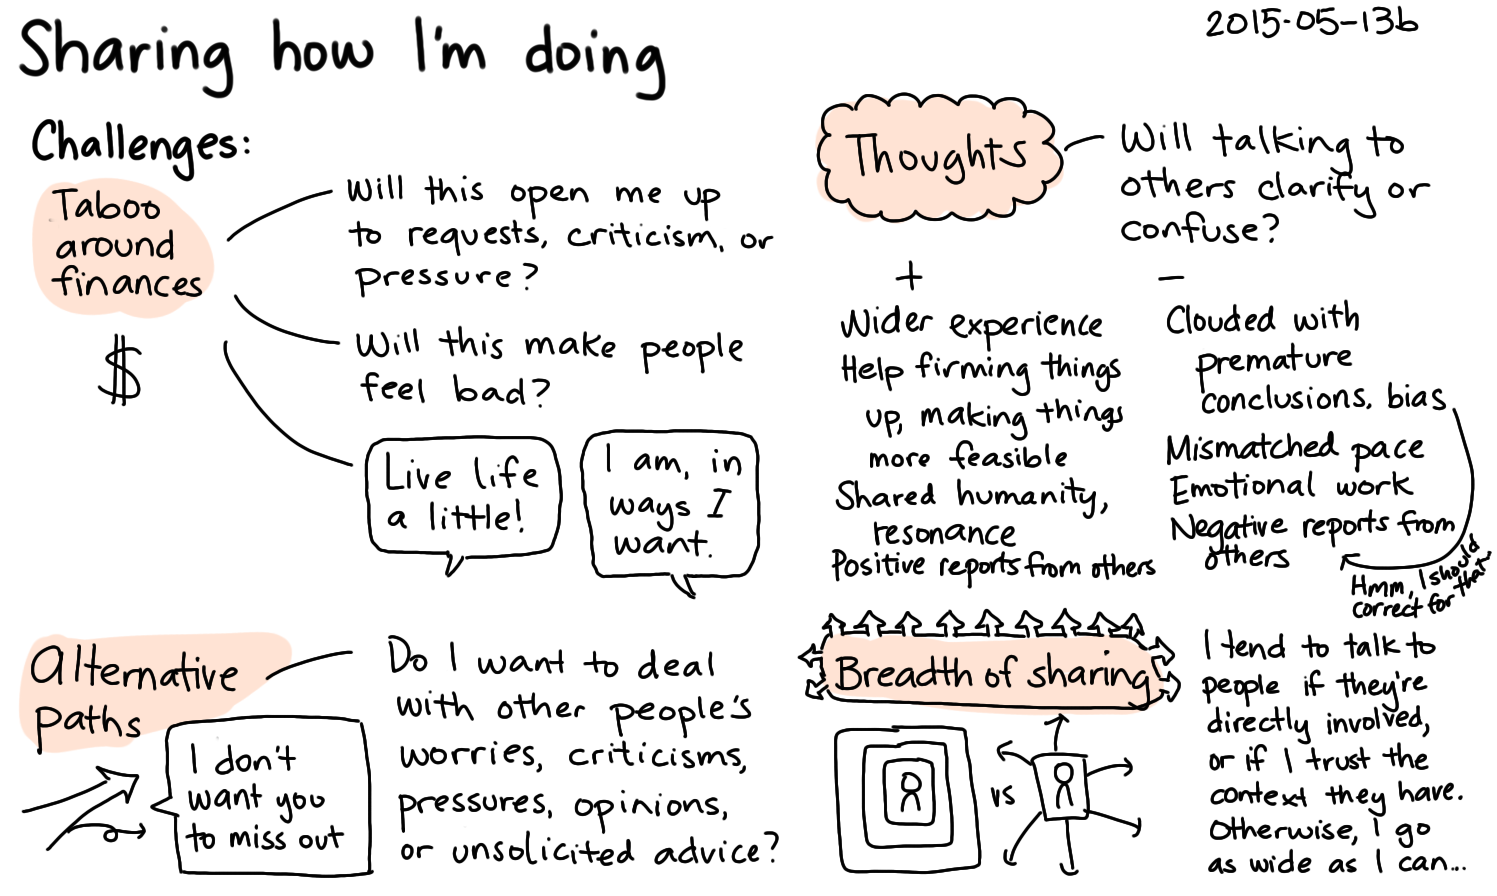 2015-05-13b Sharing how I'm doing - challenges -- index card #sharing #challenges.png